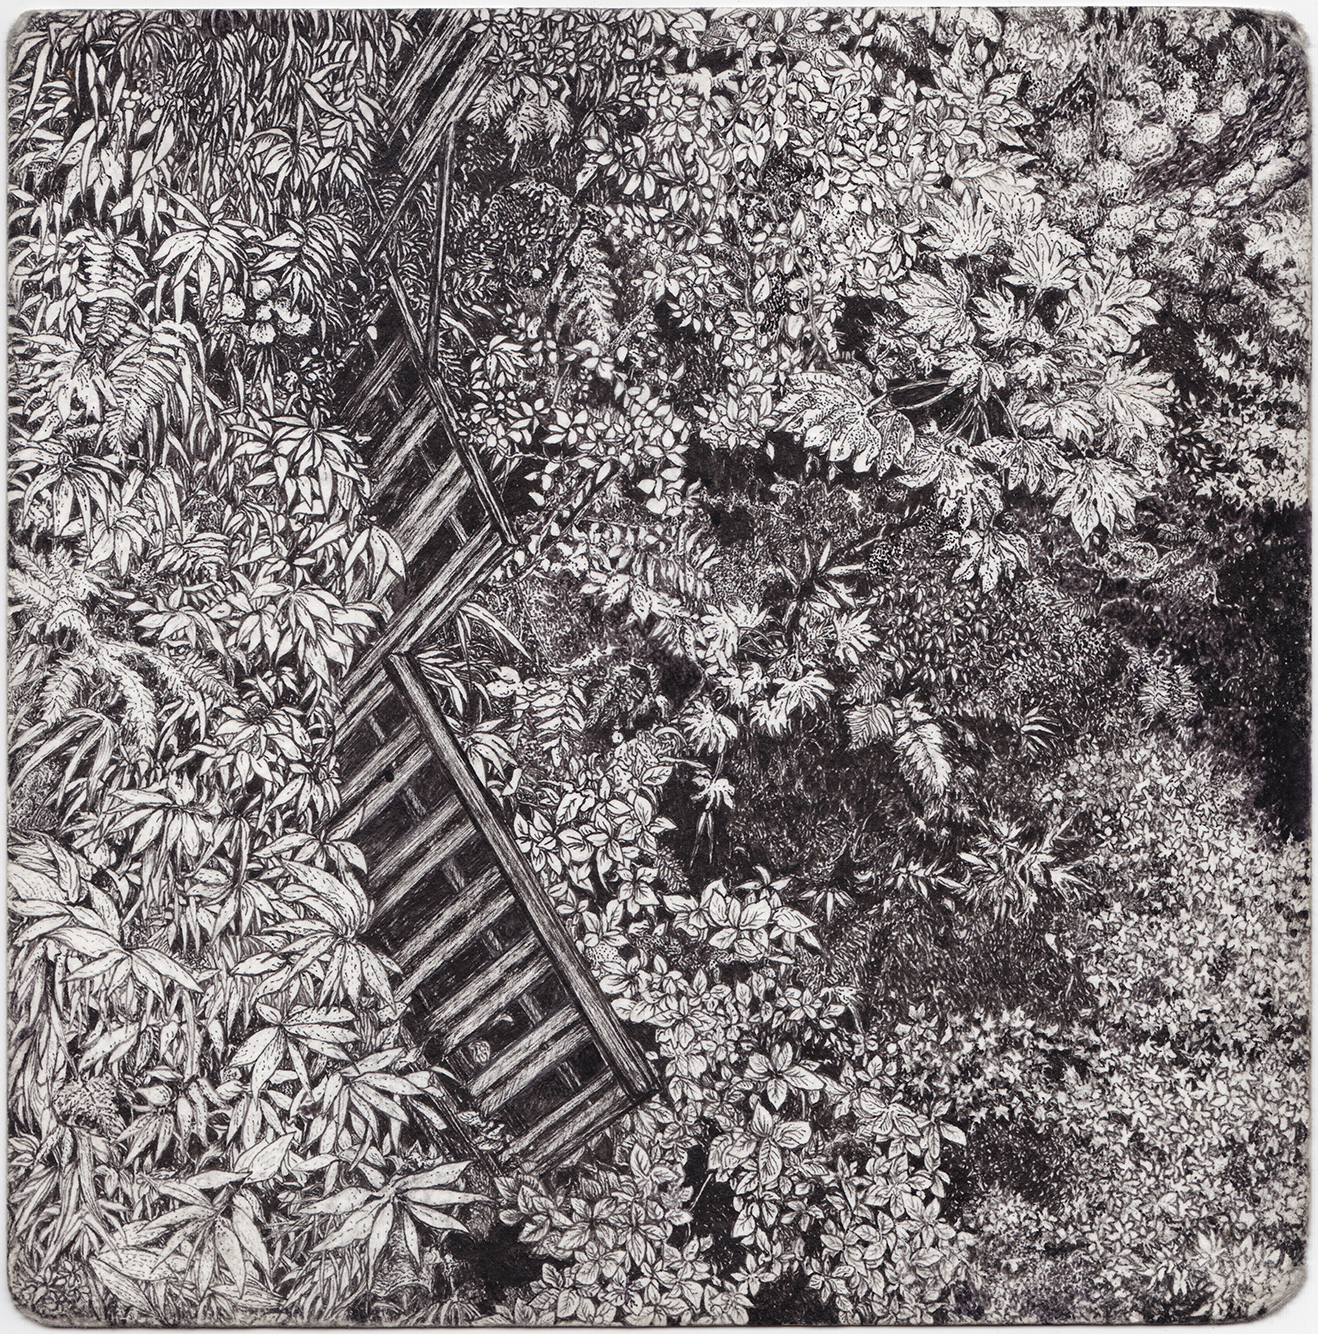 a black and white drawing of a fence descending into leaves